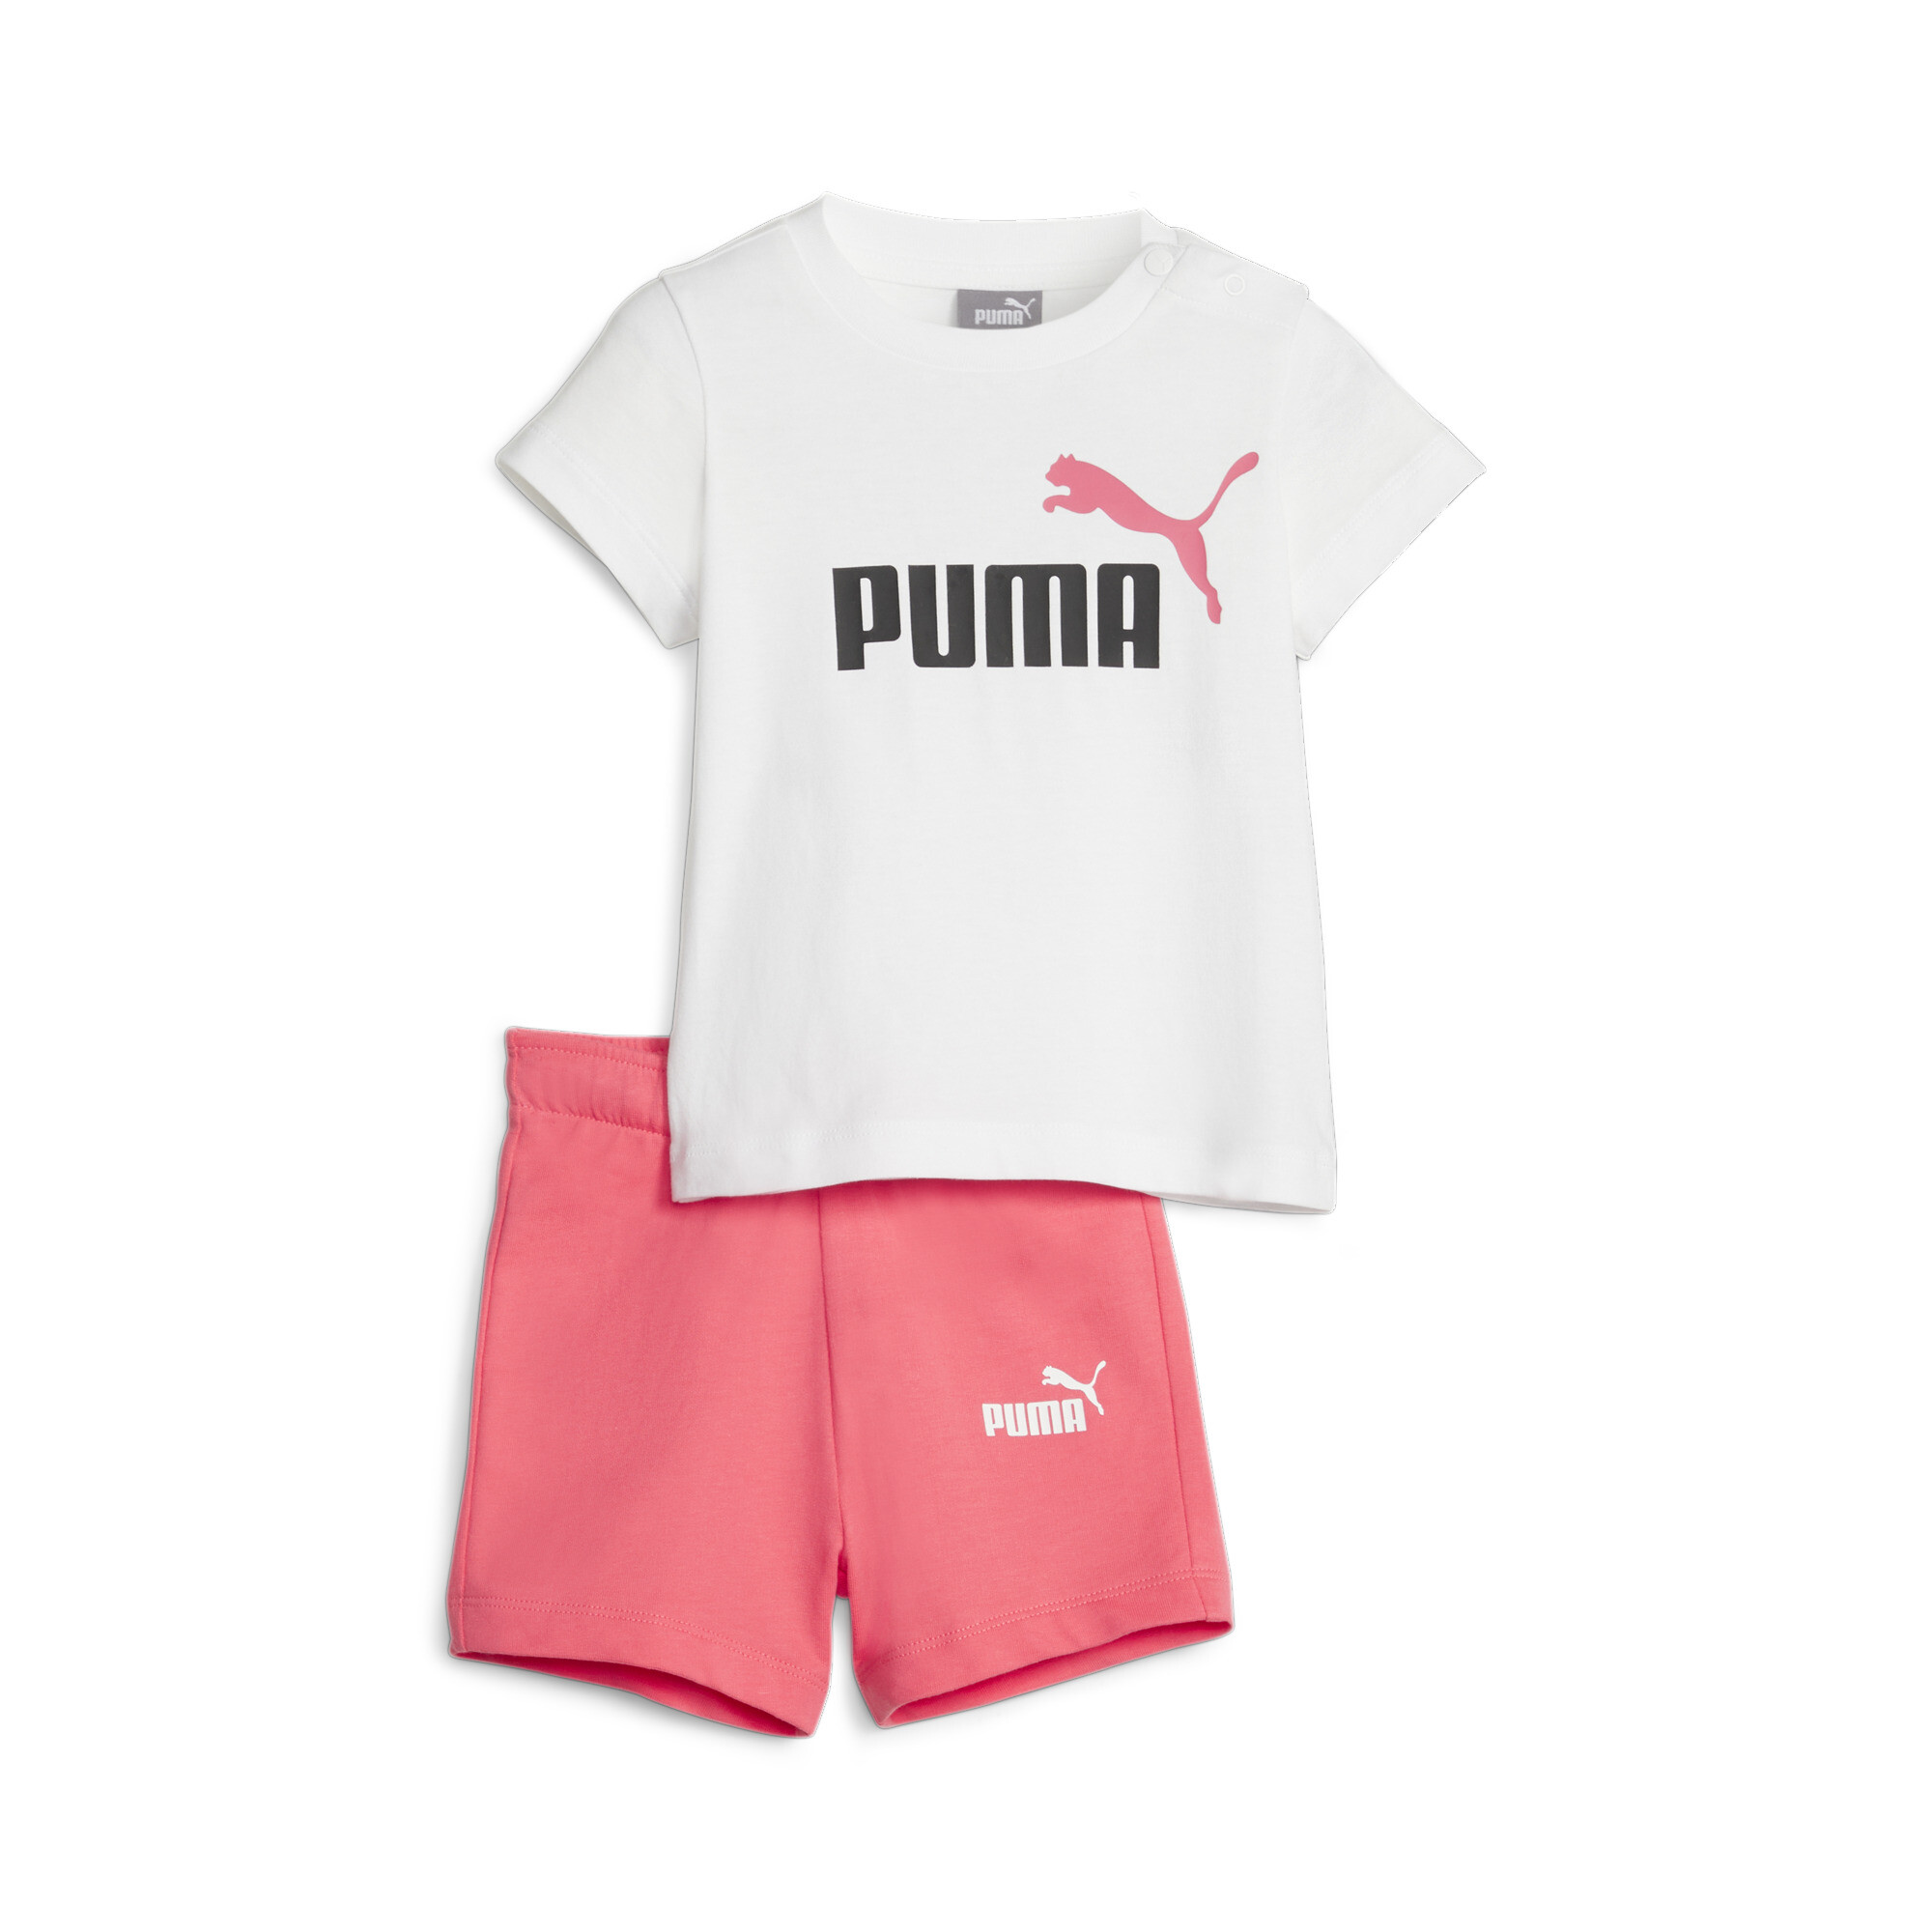 PUMA Minicats T-Shirt And Shorts Babies' Set In Pink, Size 4-6 Months